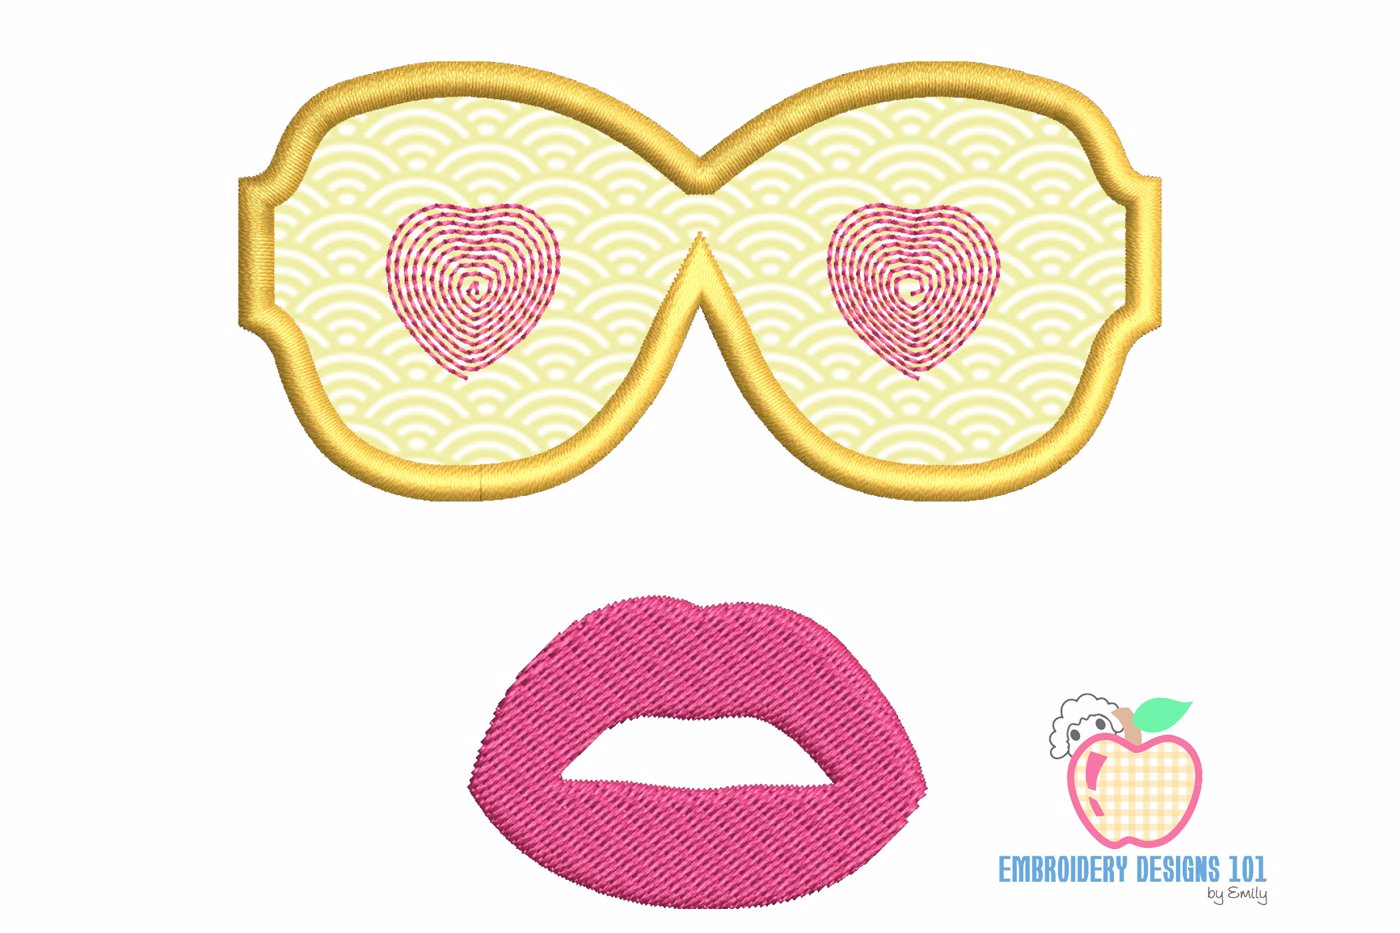 Love sunglasses with female lips embroidery applique